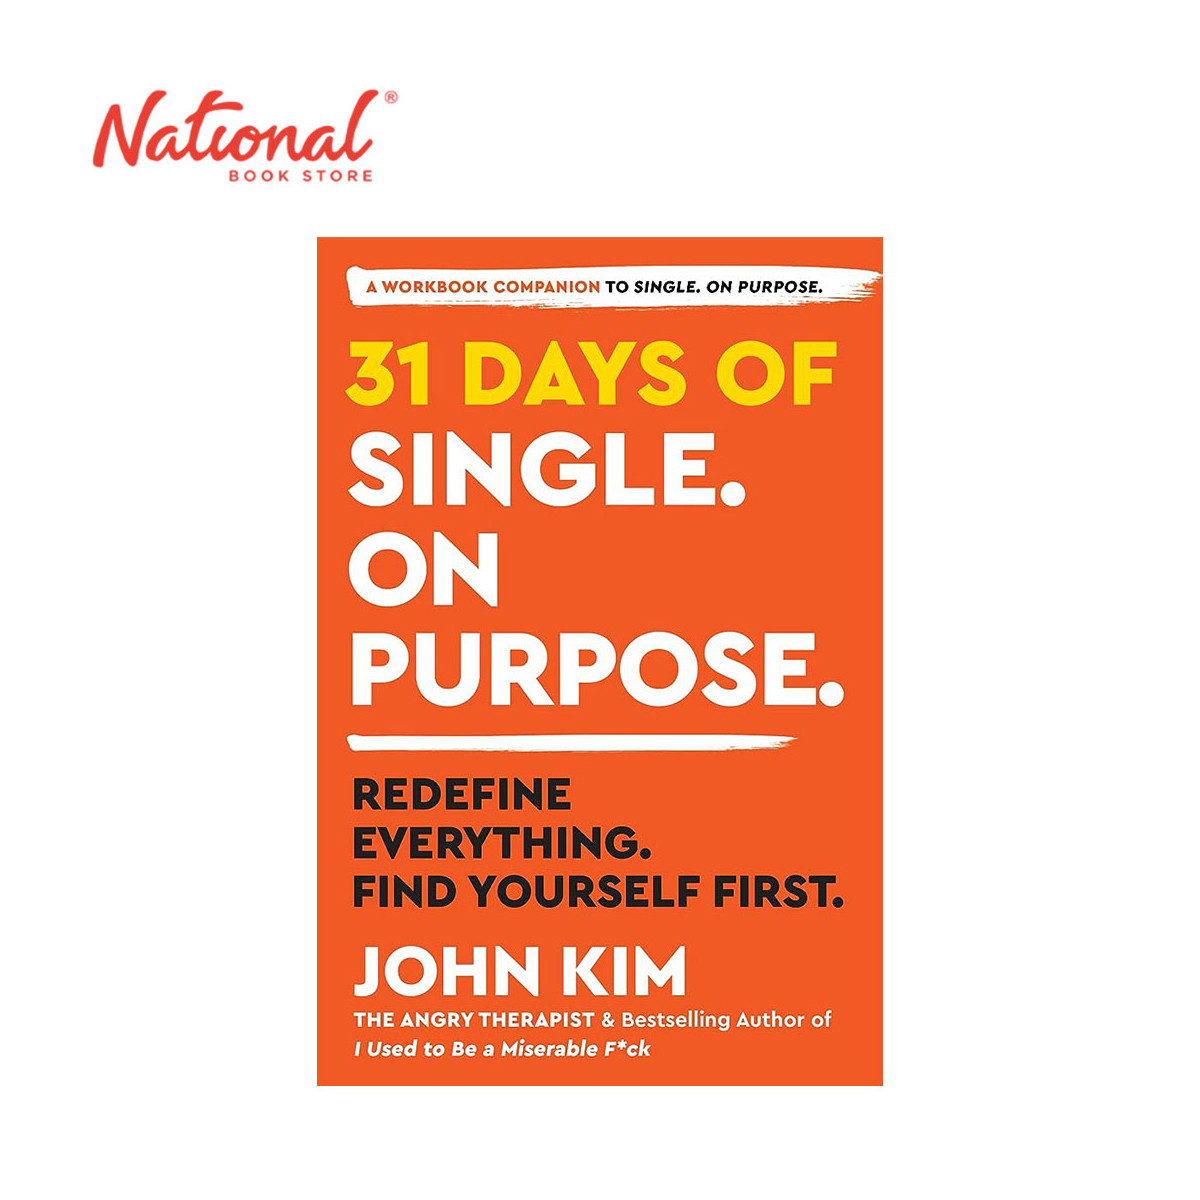 31 Days Of Single On Purpose by John Kim - Trade Paperback - Relationships & Sexuality